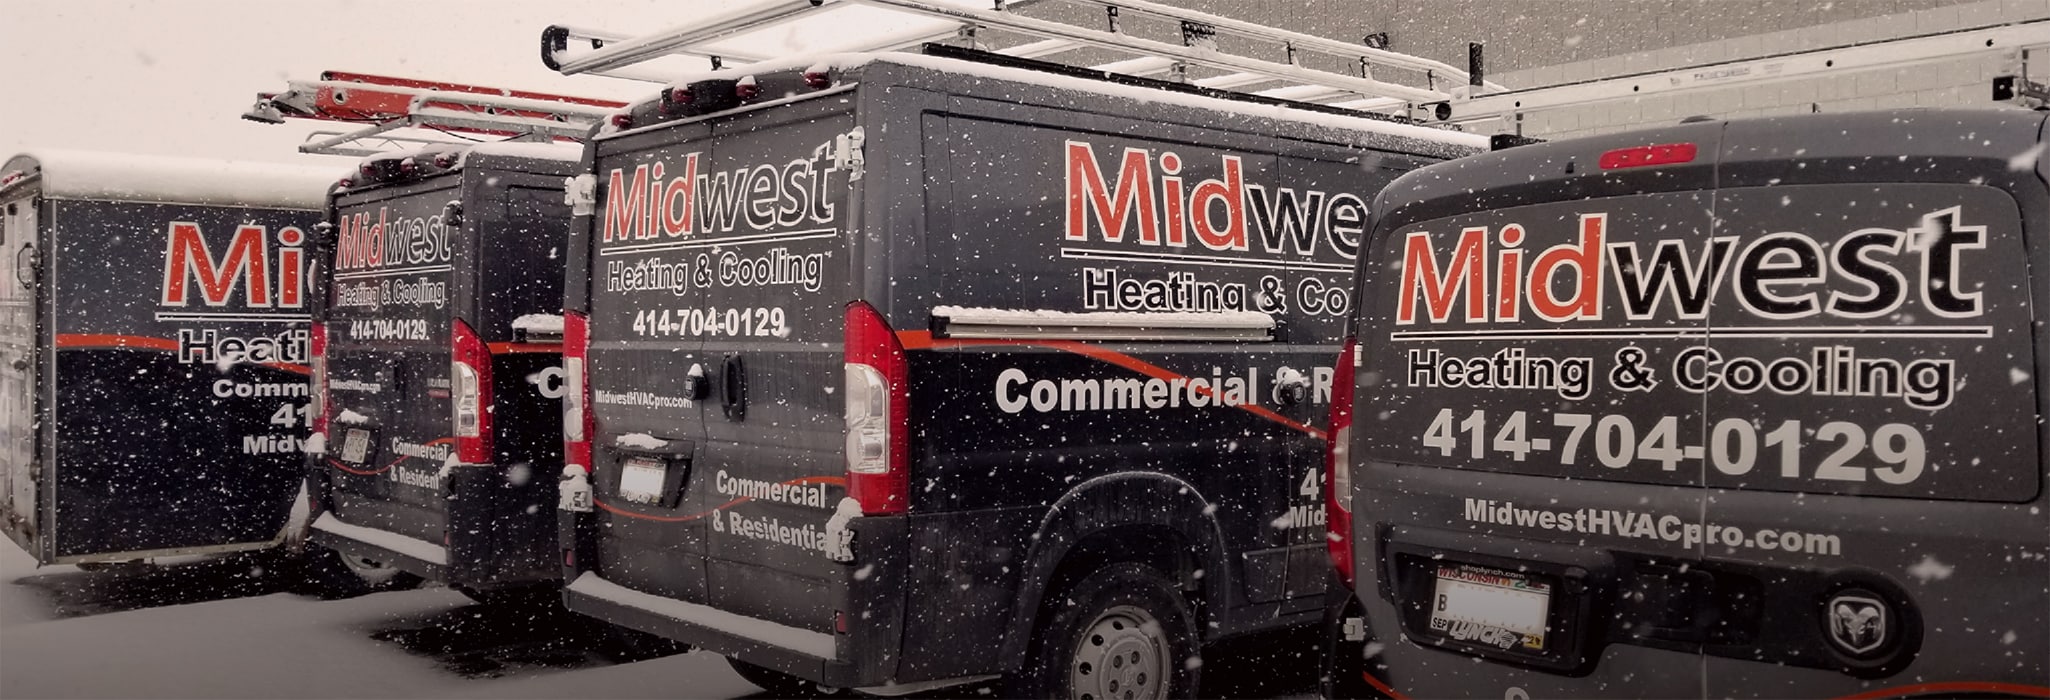 Midwest Heating and Cooling Fleet